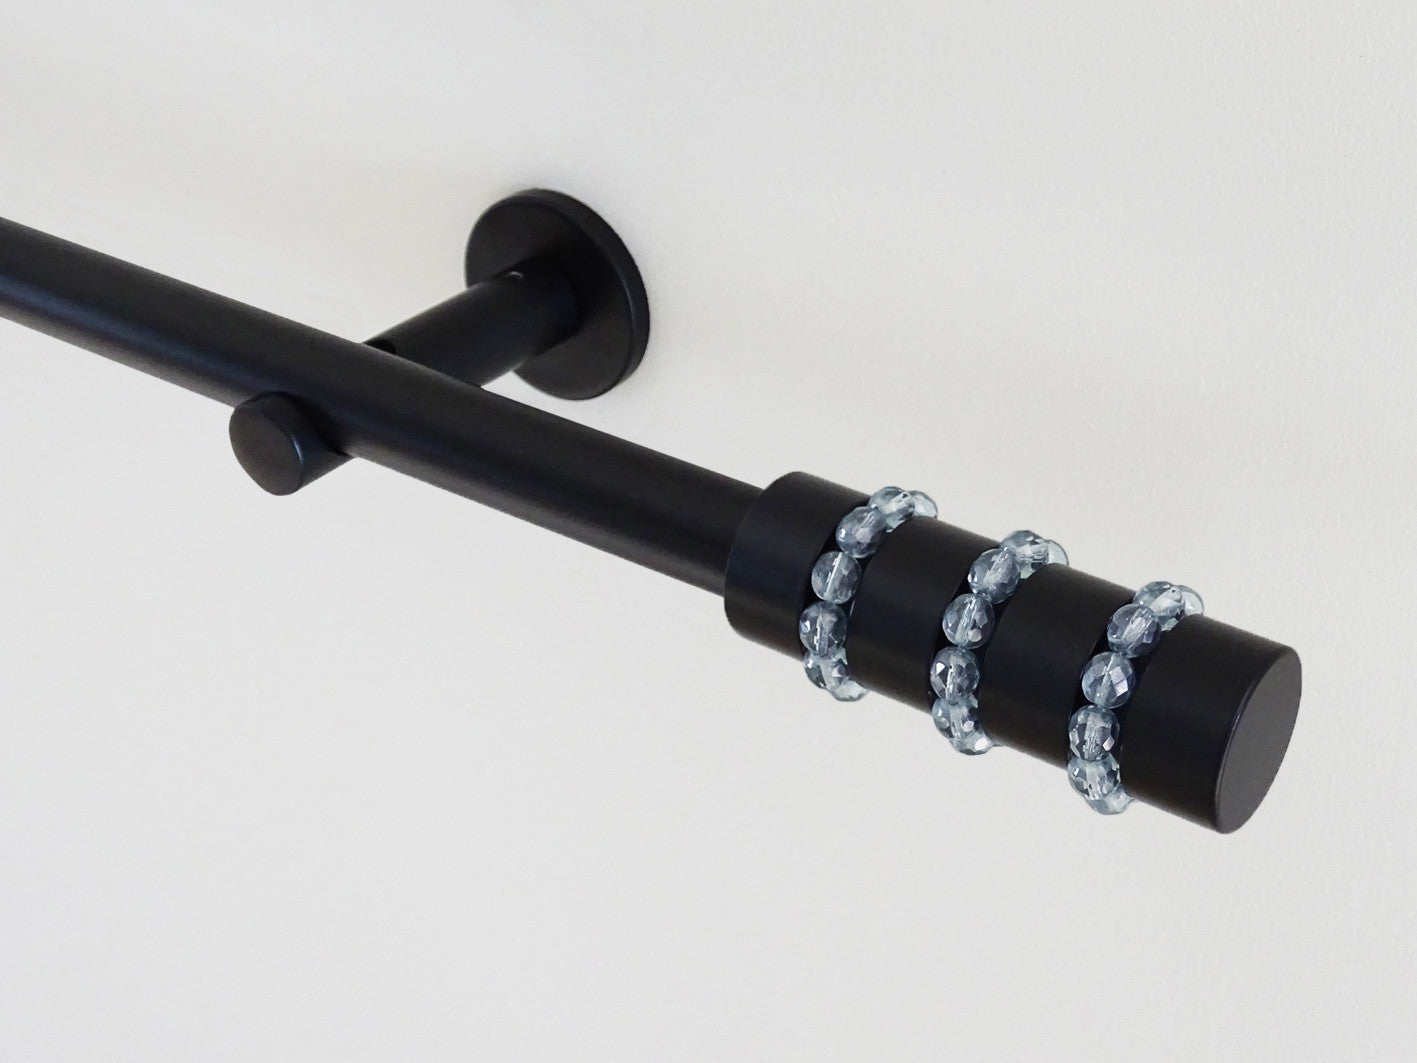 19mm diameter black metal curtain pole set with icicle beaded finials